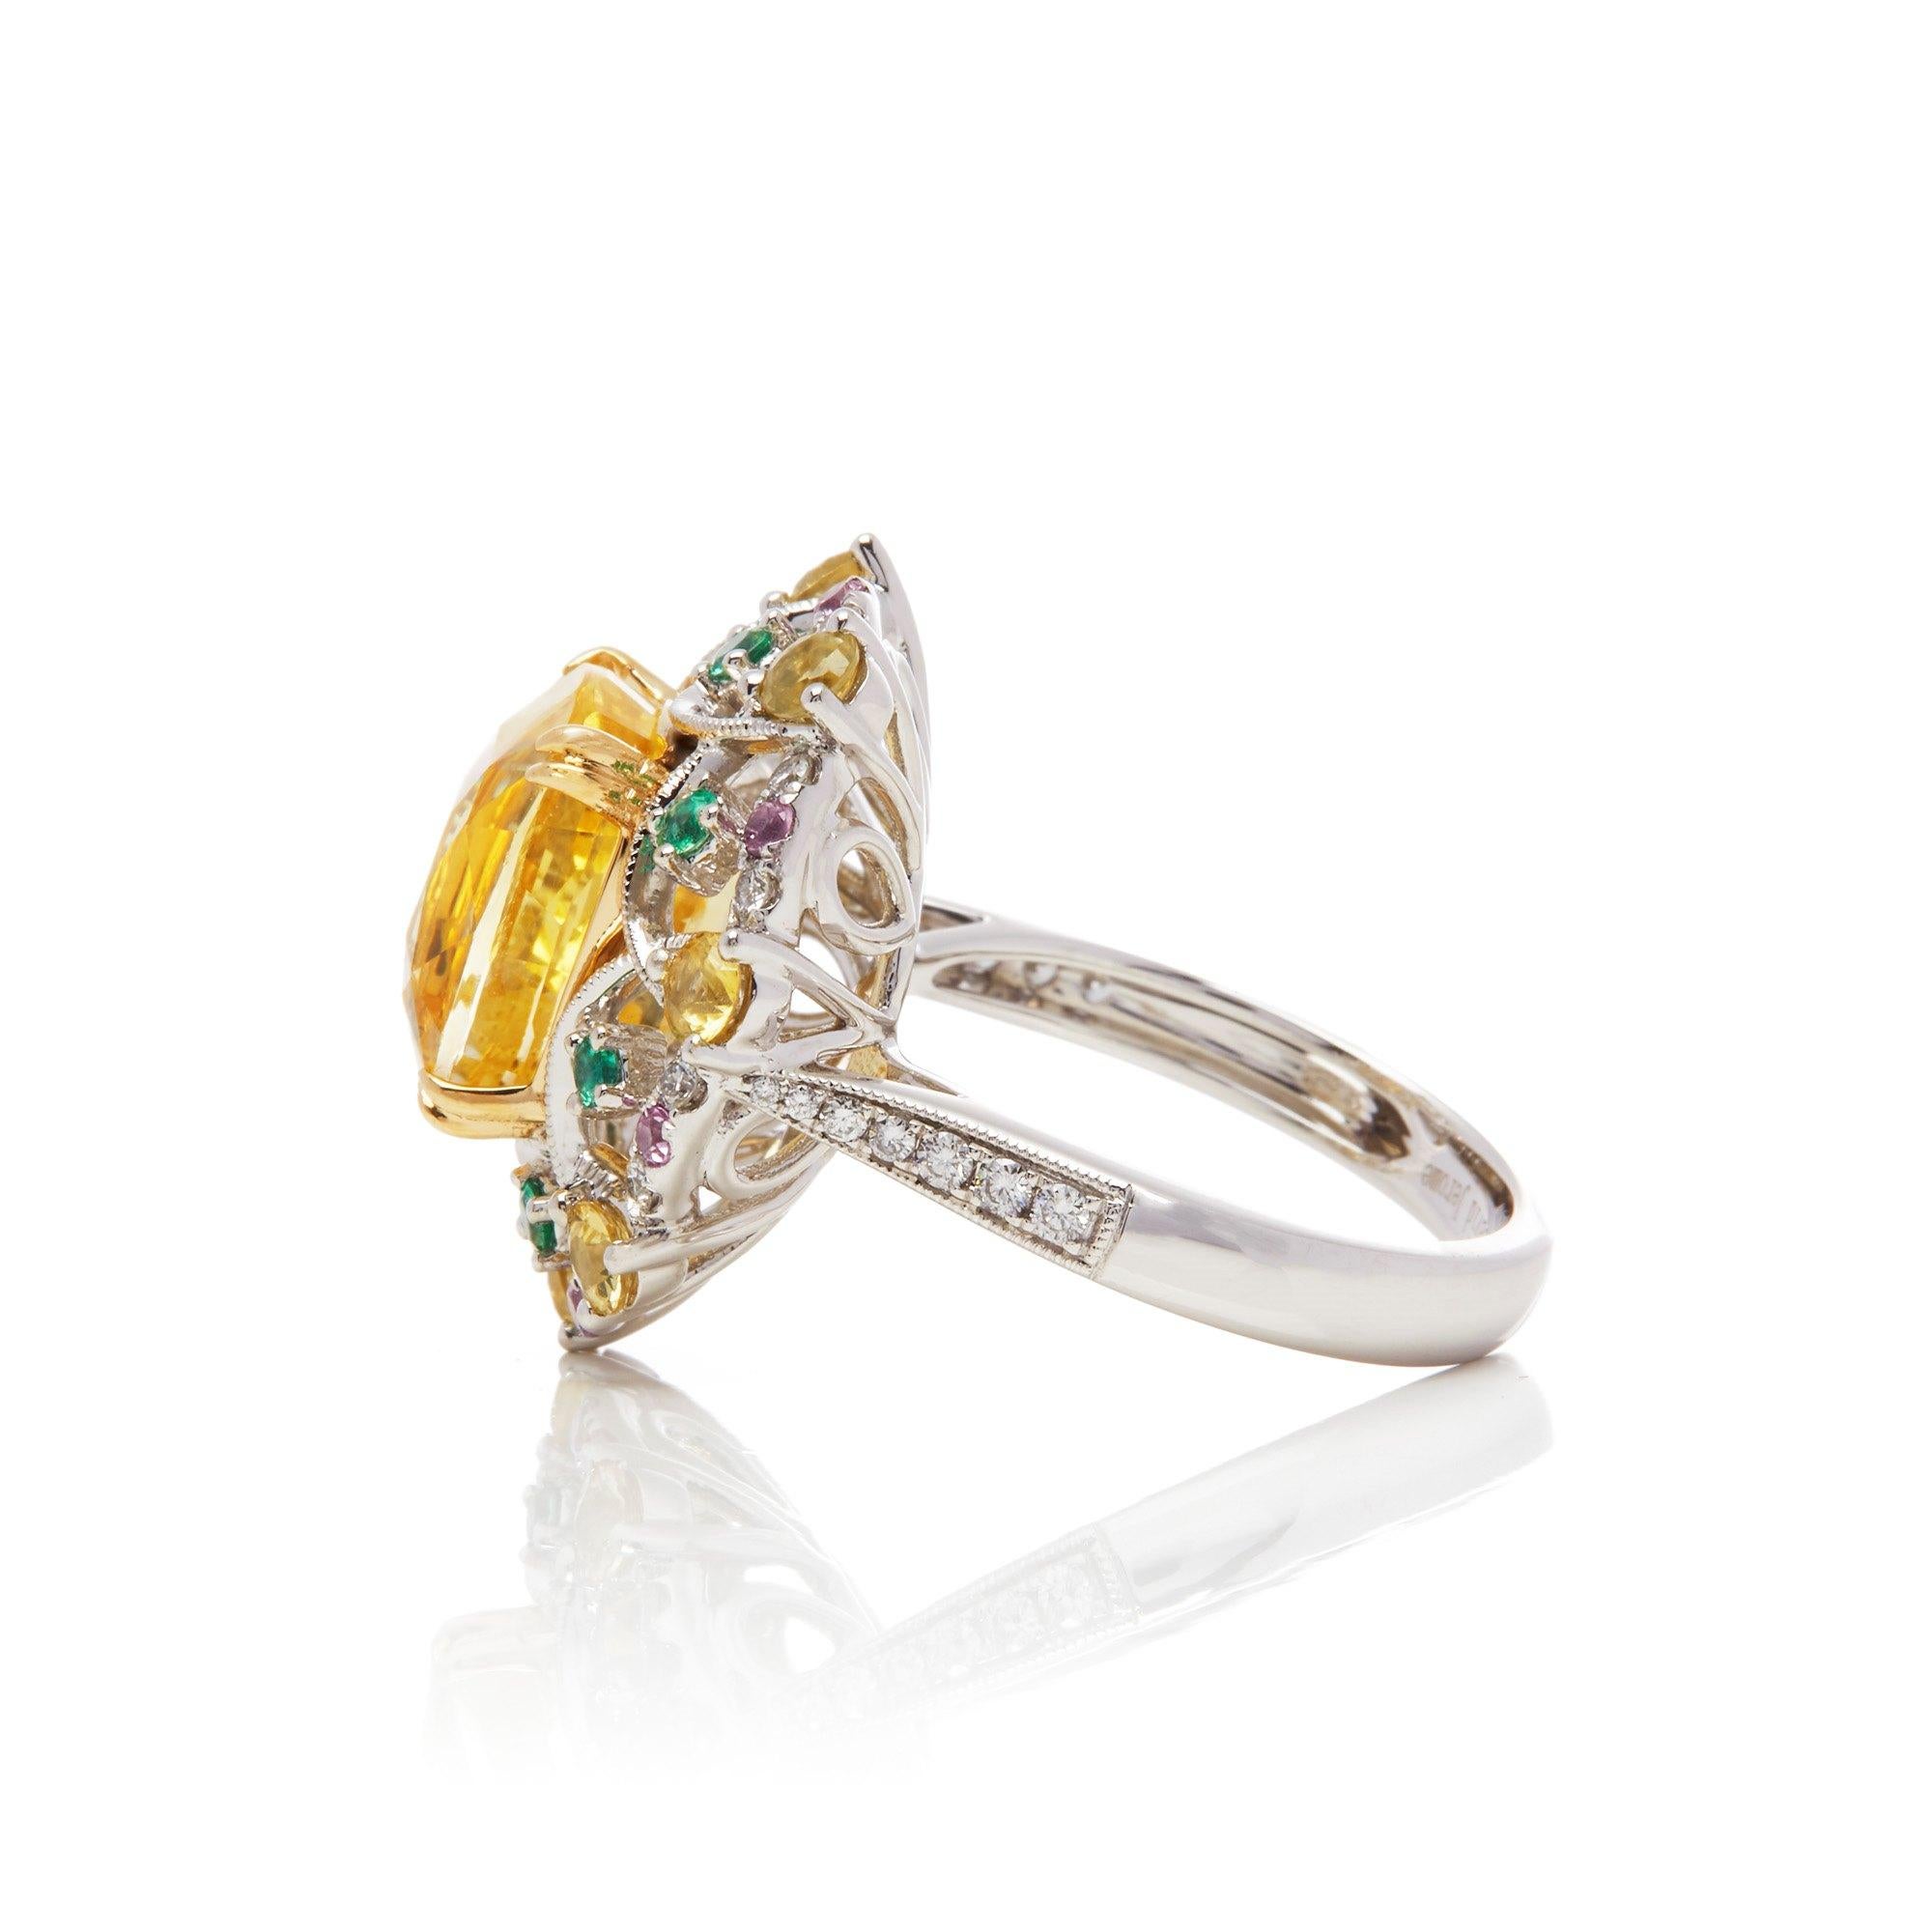 This ring designed by David Jerome is from his private collection and features one cushion cut yellow Sapphire sourced in Sri Lanka totalling 8.60cts. Set with a mix of round brilliant cut Diamonds, Emeralds and yellow Sapphires totalling 2.48cts